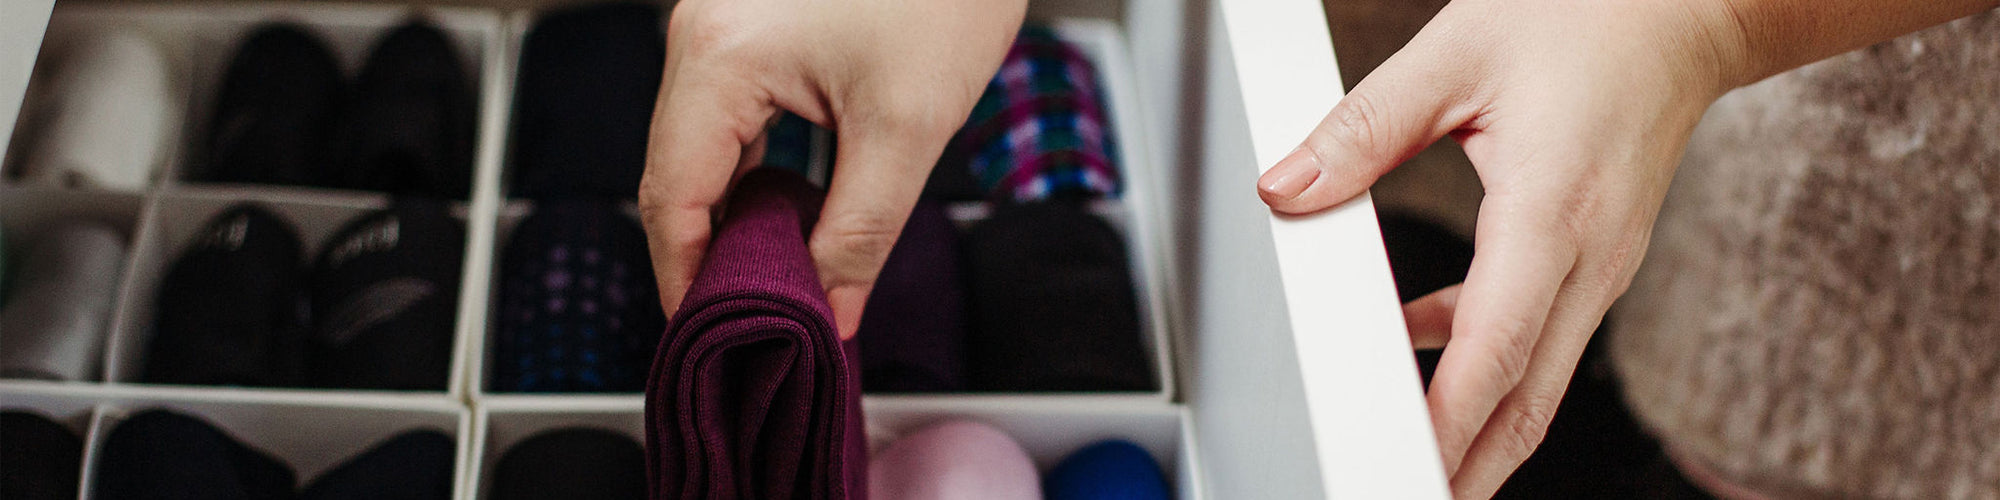 Time to get organized! Spring cleaning for your sock drawer